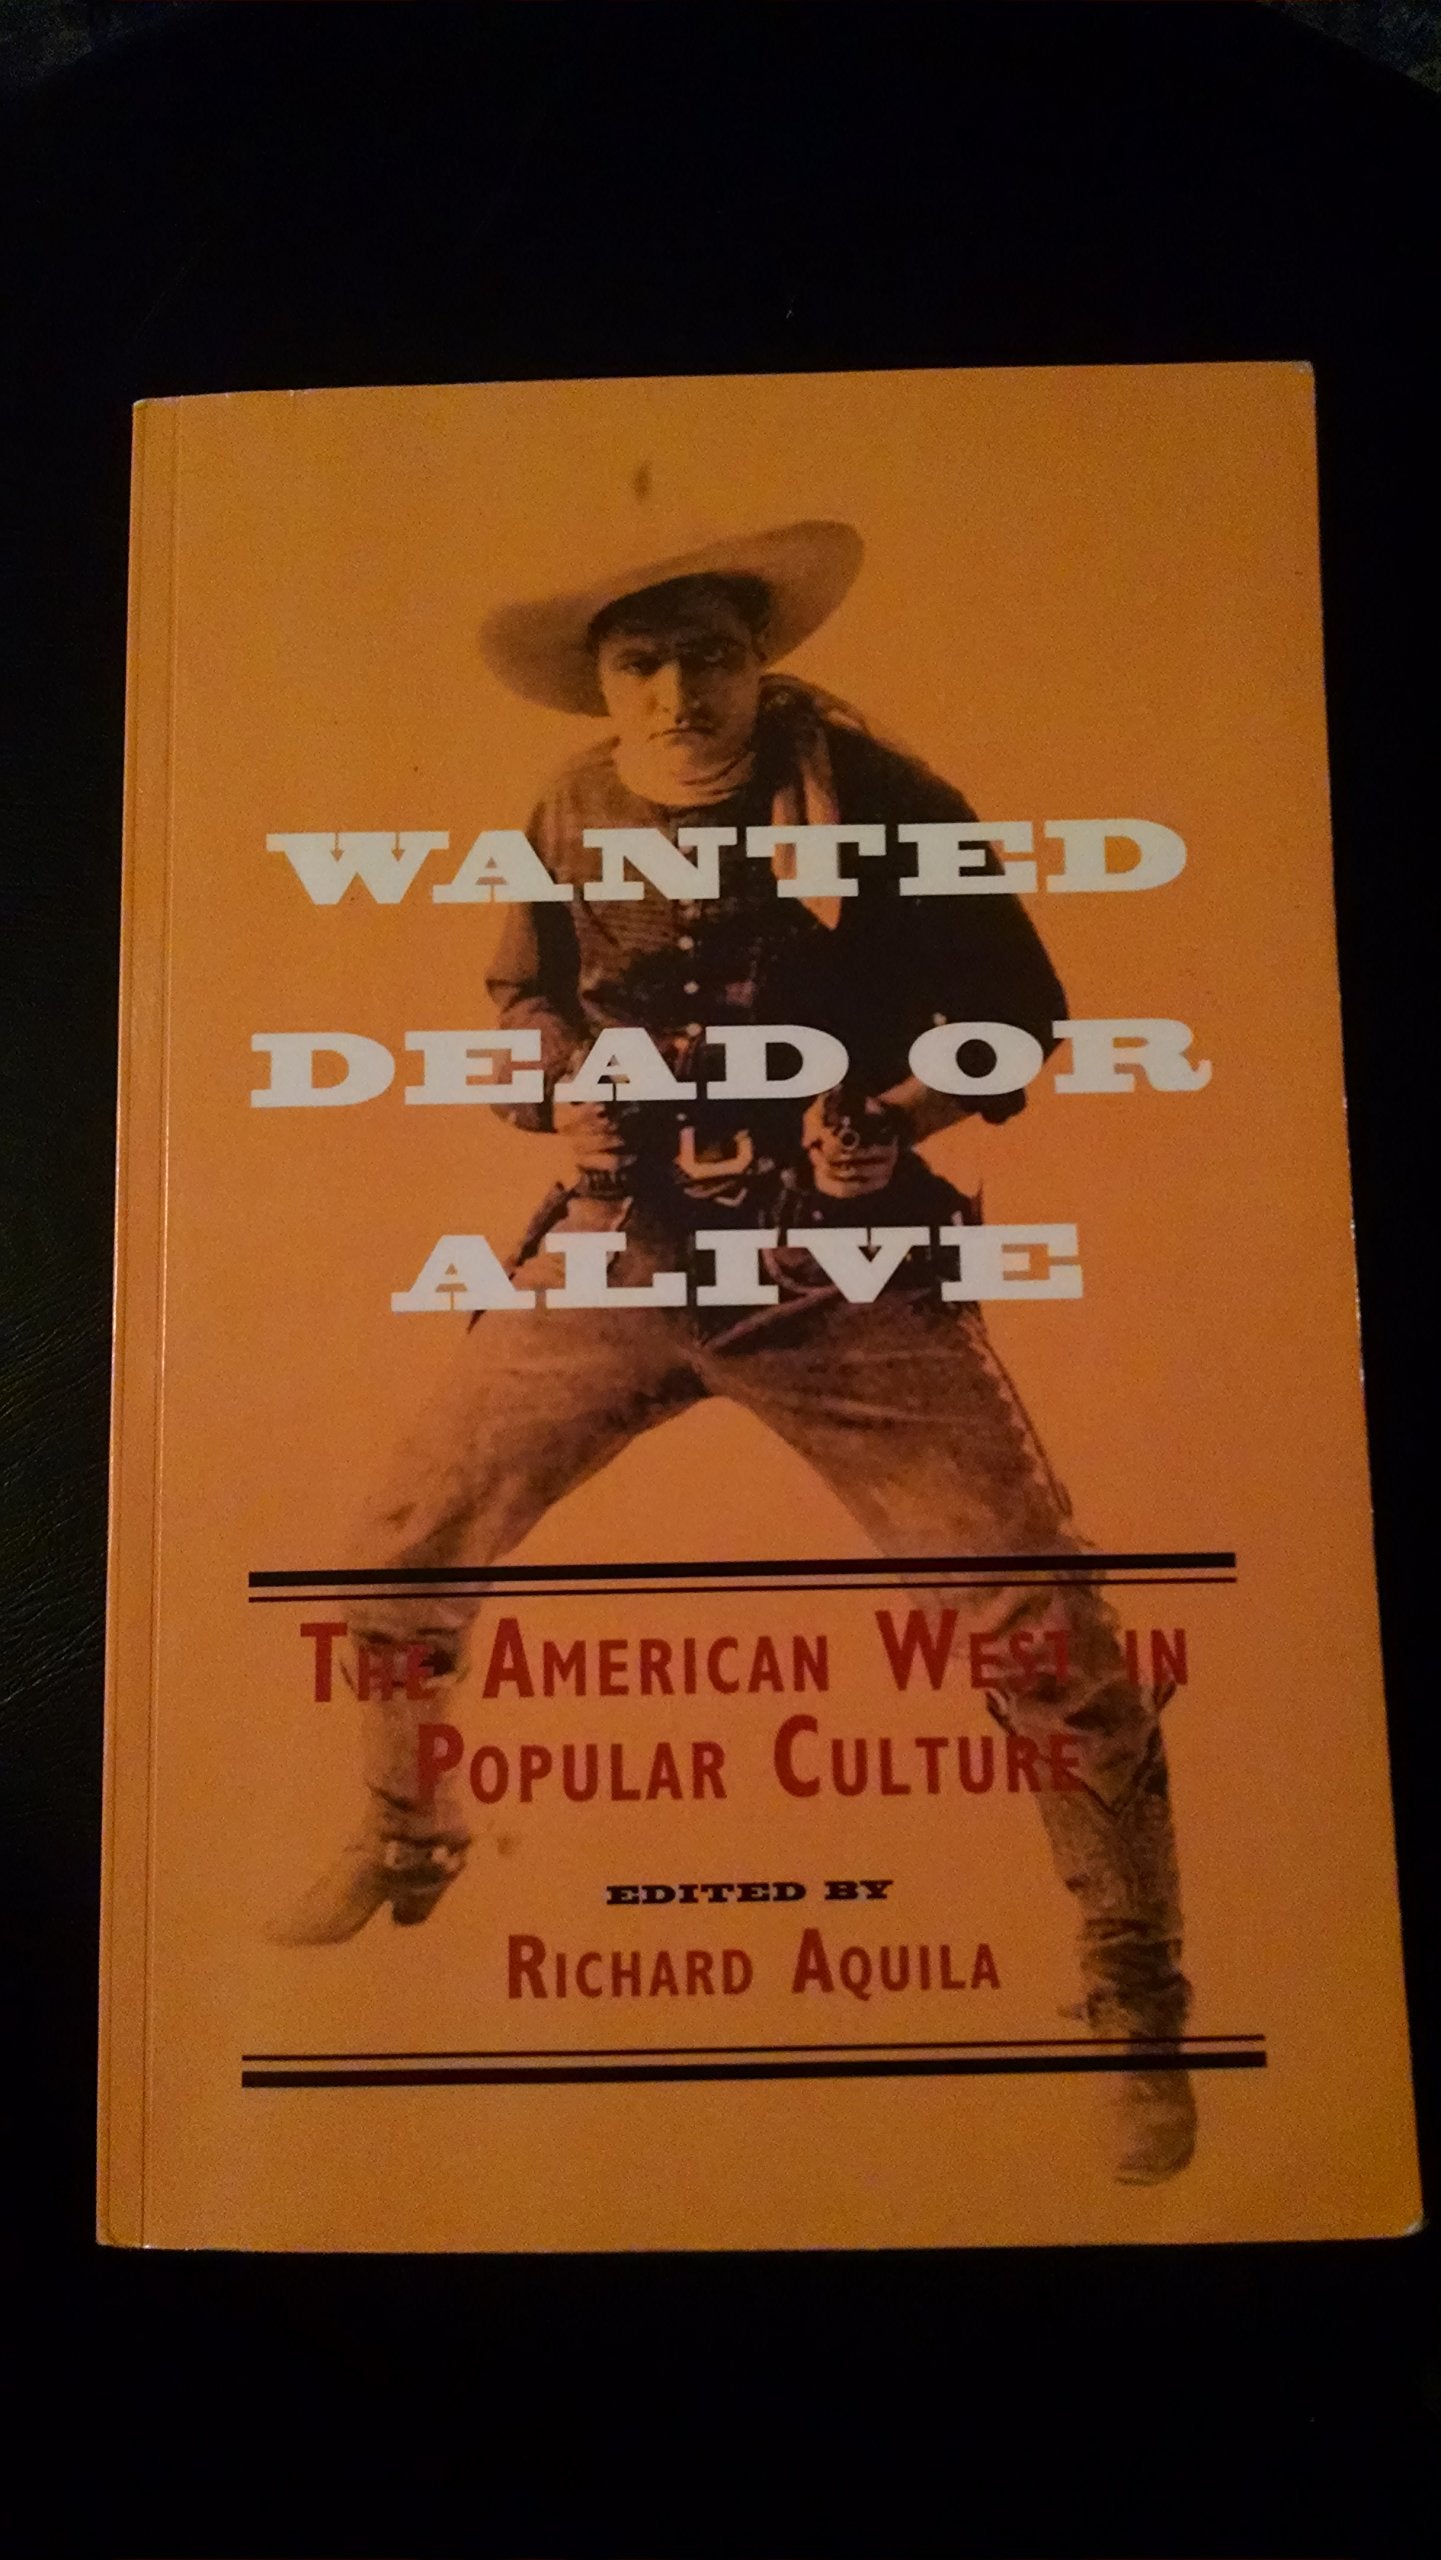 Wanted Dead or Alive: THE AMERICAN WEST IN POPULAR CULTURE